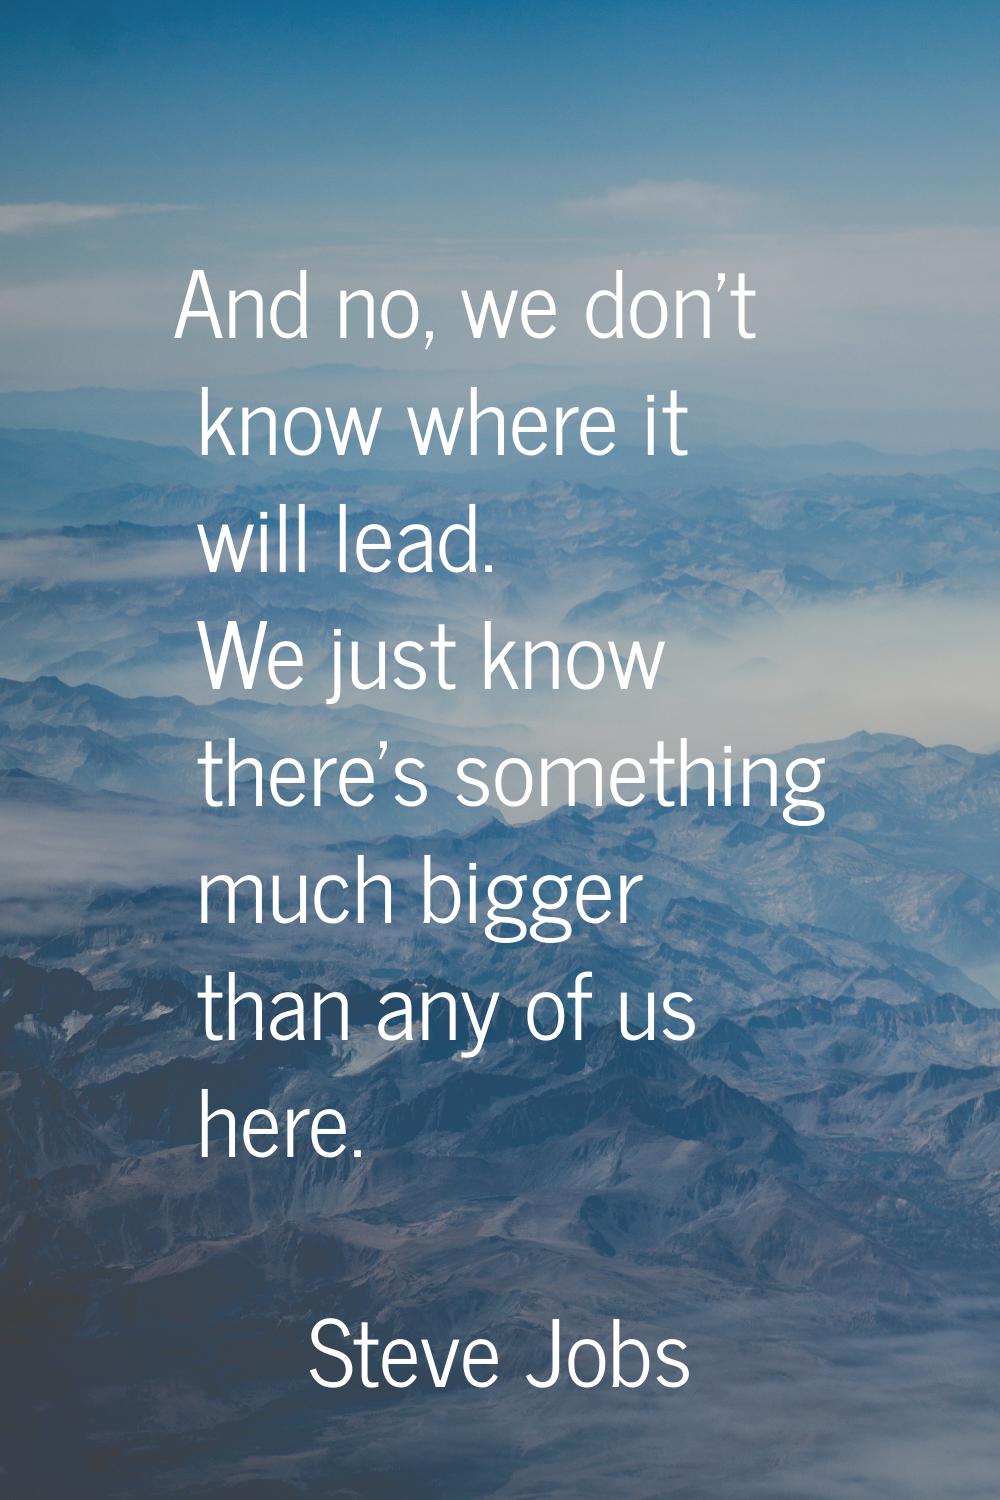 And no, we don't know where it will lead. We just know there's something much bigger than any of us